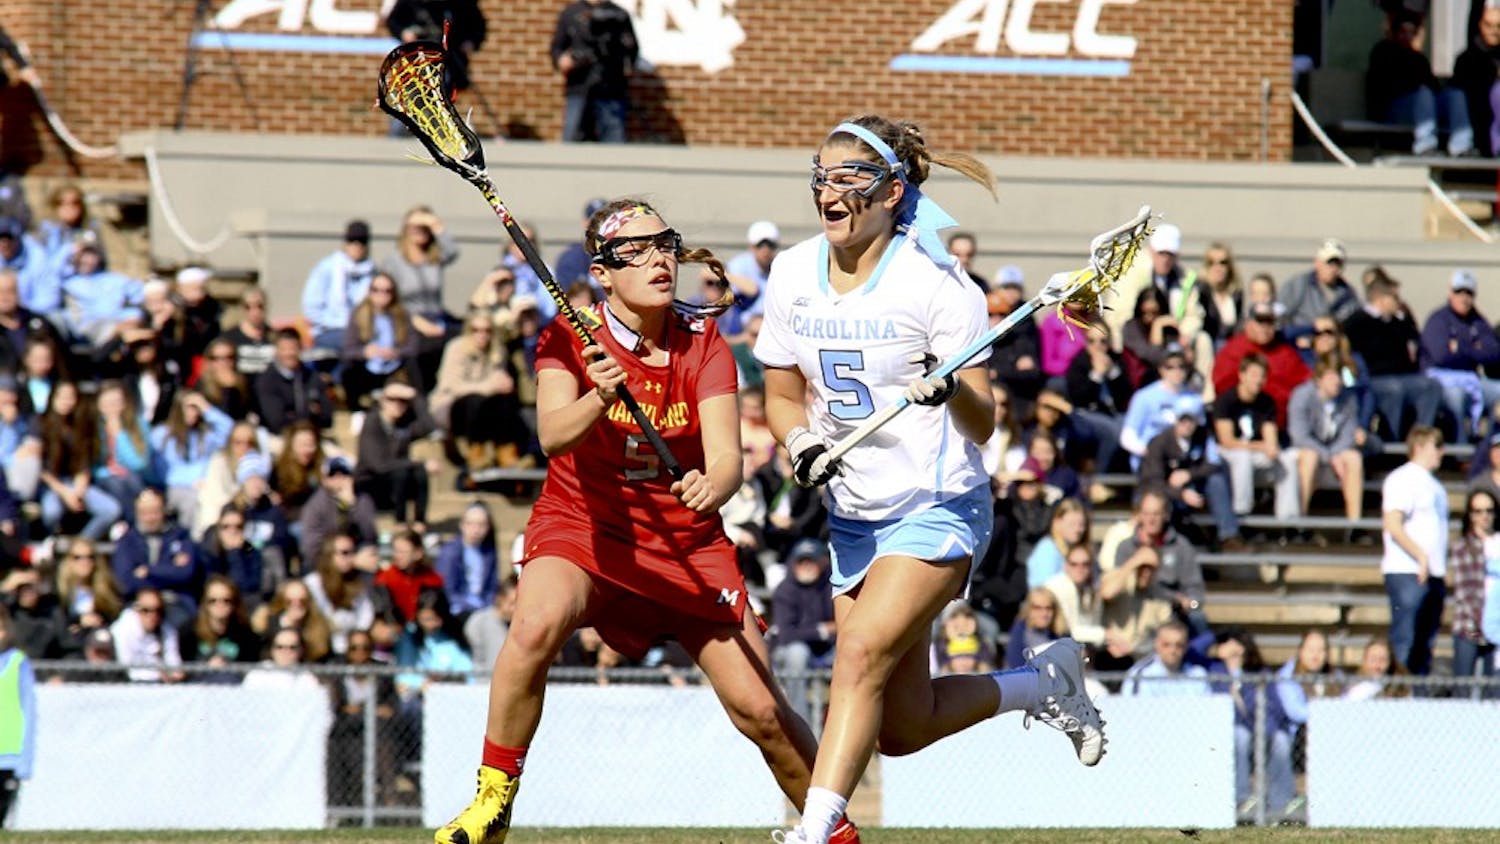 Olivi Ferrucci (5) runs past a Maryland defender Saturday afternoon. Ferrucci had two goals in the Tar Heels loss to the Maryland Terrapins. 